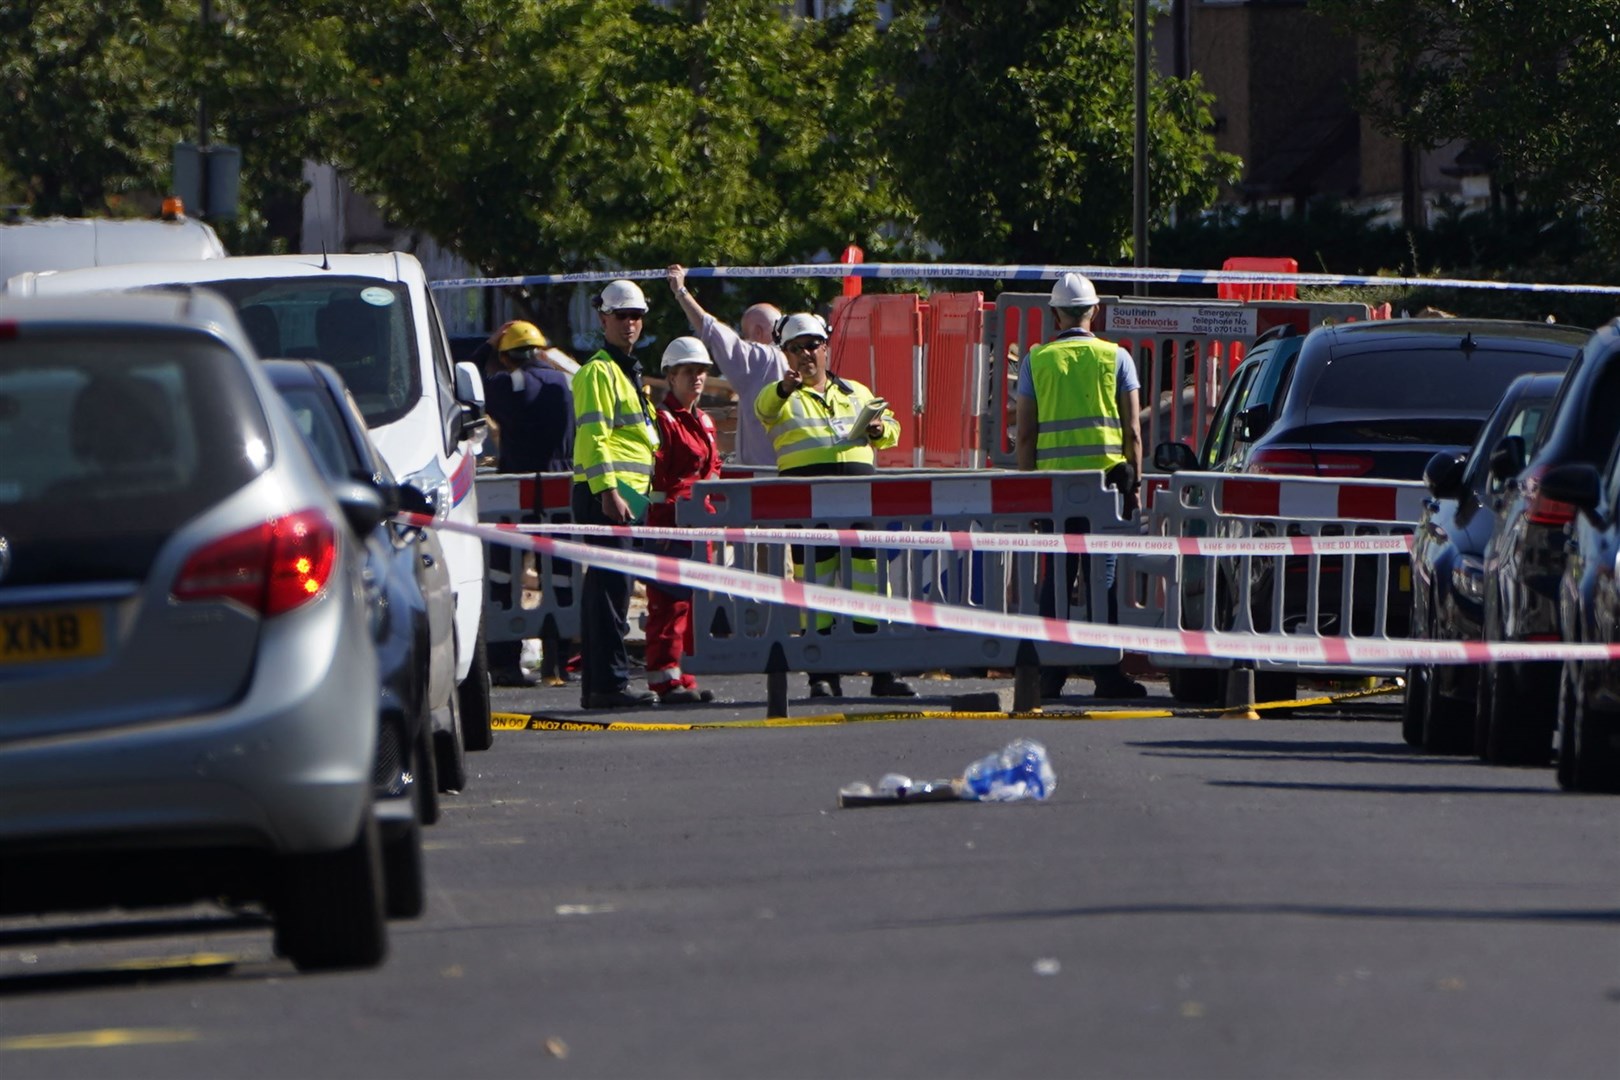 A 200-metre cordon was put in place following the explosion (Kirsty O’Connor/PA)